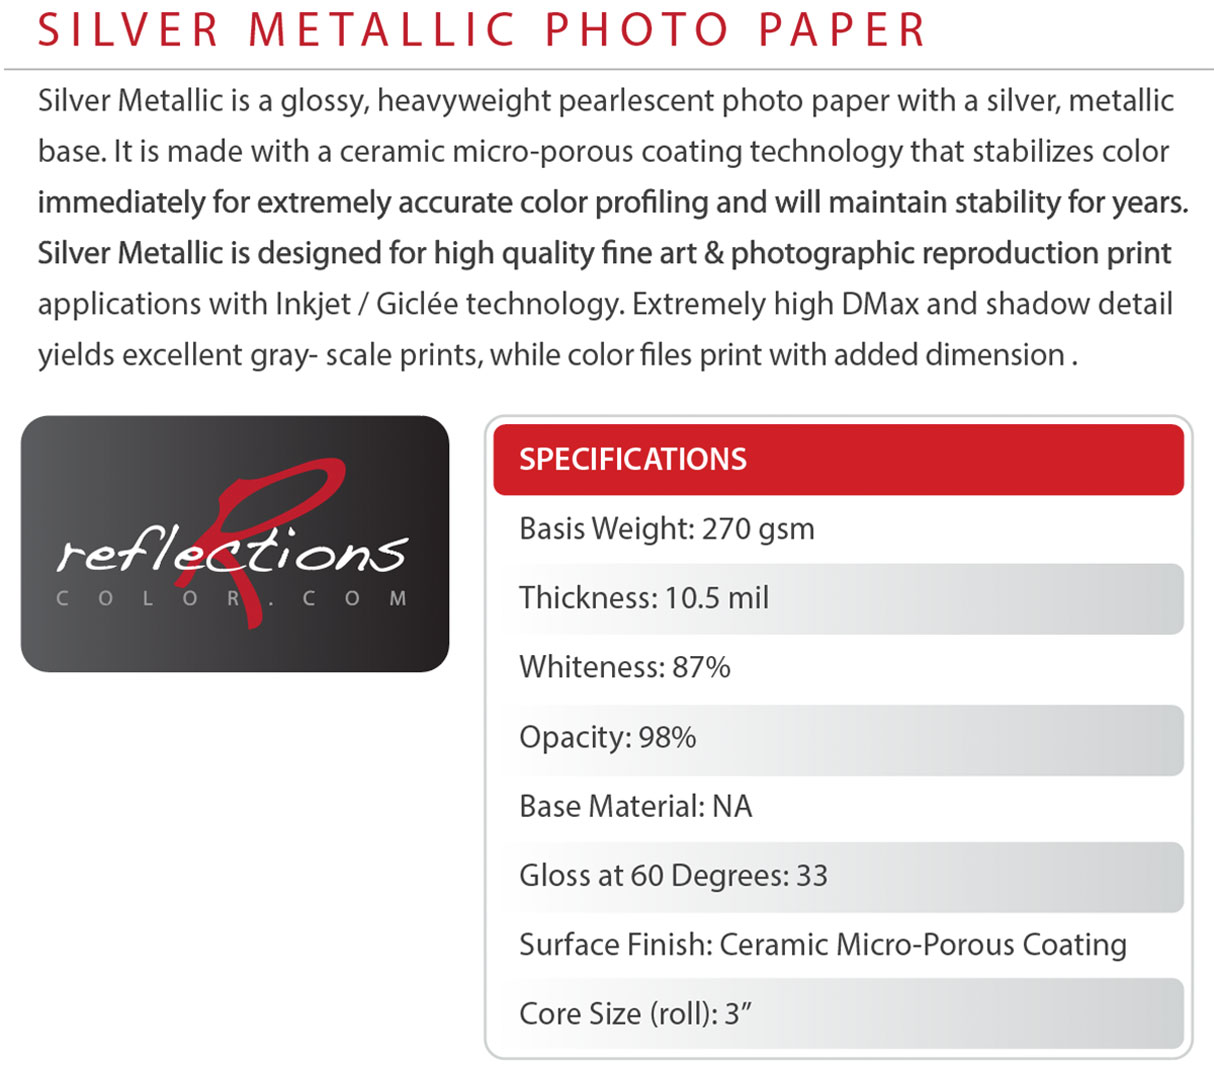 reflections silver metallic photo paper featuring metallic glossy pearlescent surface with 270gsm and 10.5mil